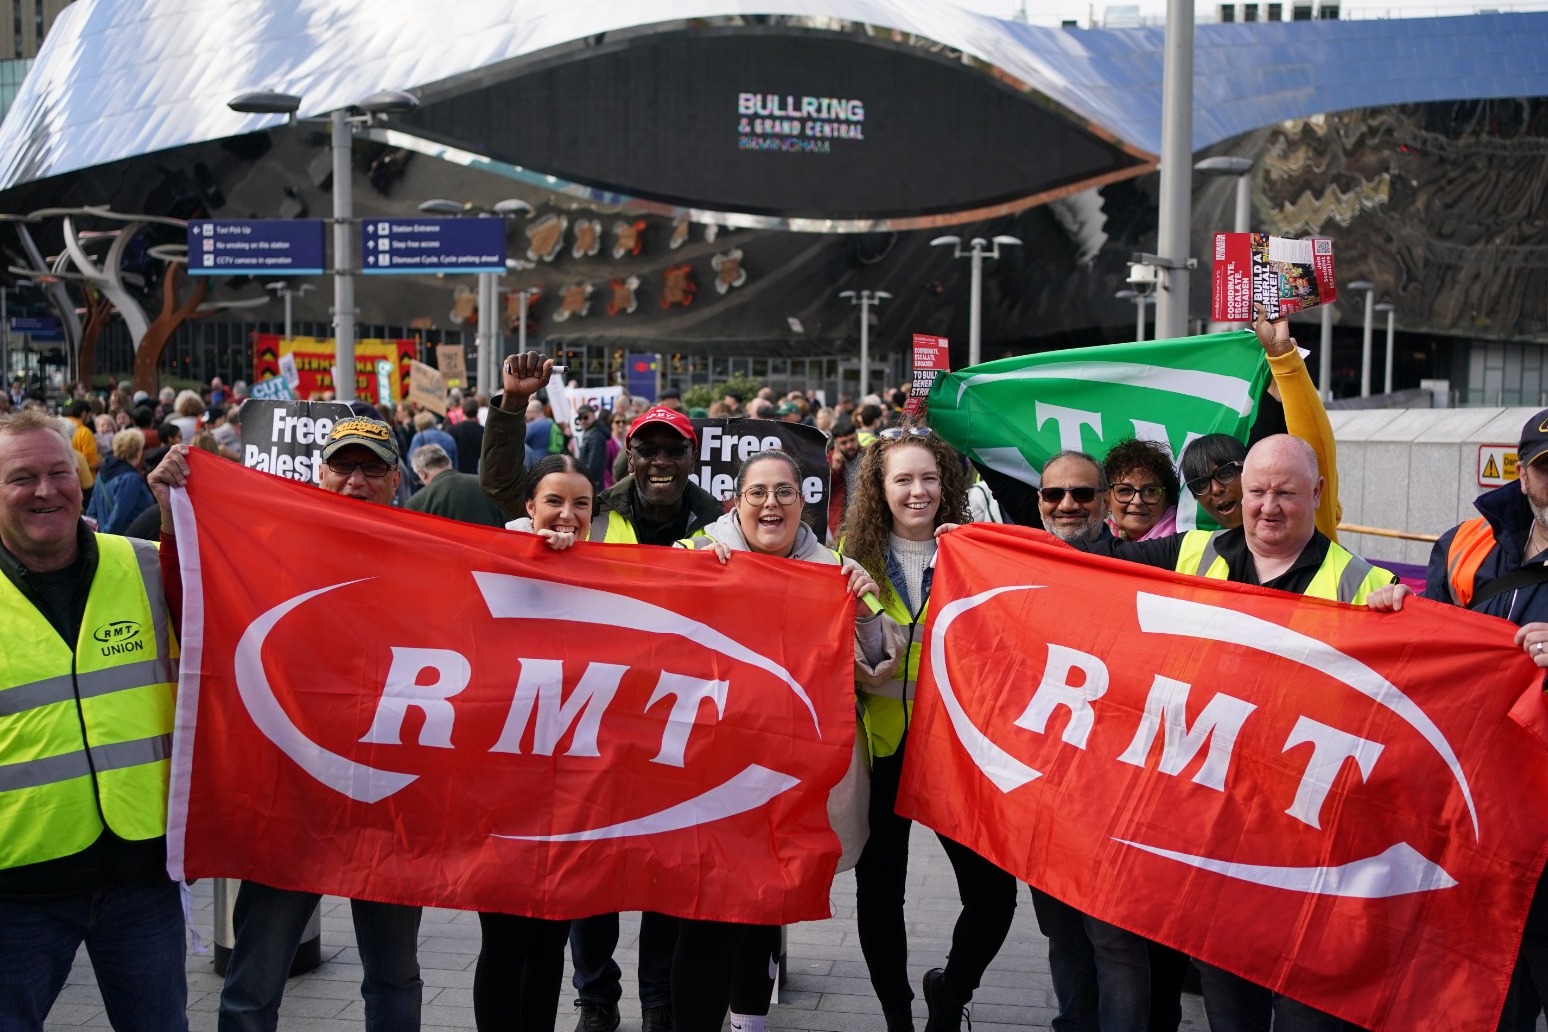 Rail dispute continues as RMT union rejects latest offer from employers 